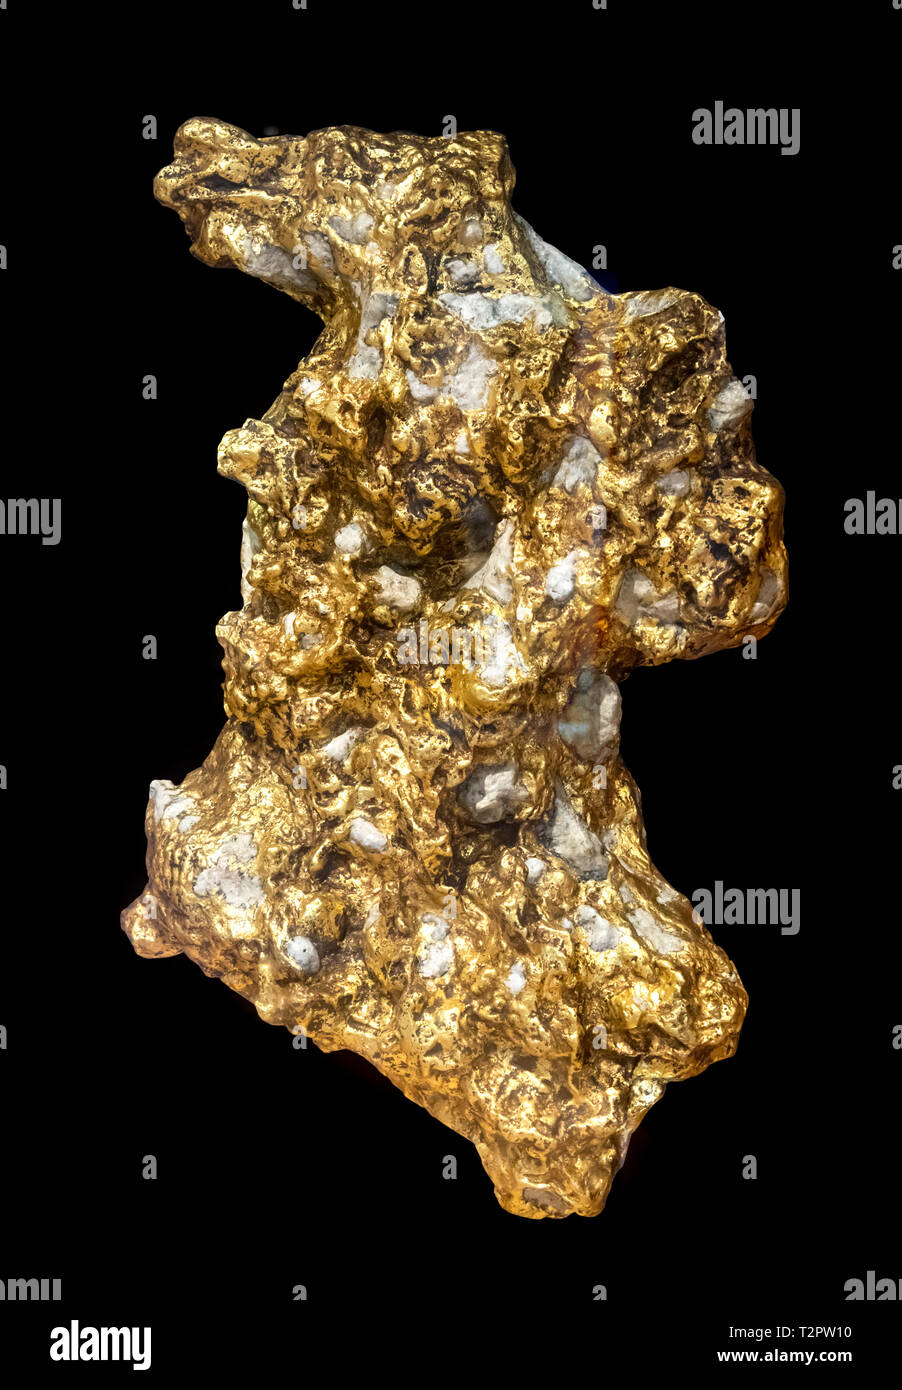 World's largest gold nugget. Replica of The Welcome Stranger, a gold nugget weighing 2,284 oz (see note below), found in Moliagul, Victoria, Australia in February 1869. The nugget was broken up before a visual record was made and the reproduction, although the same size and weight, may not be an accurate representation of shape. Stock Photo